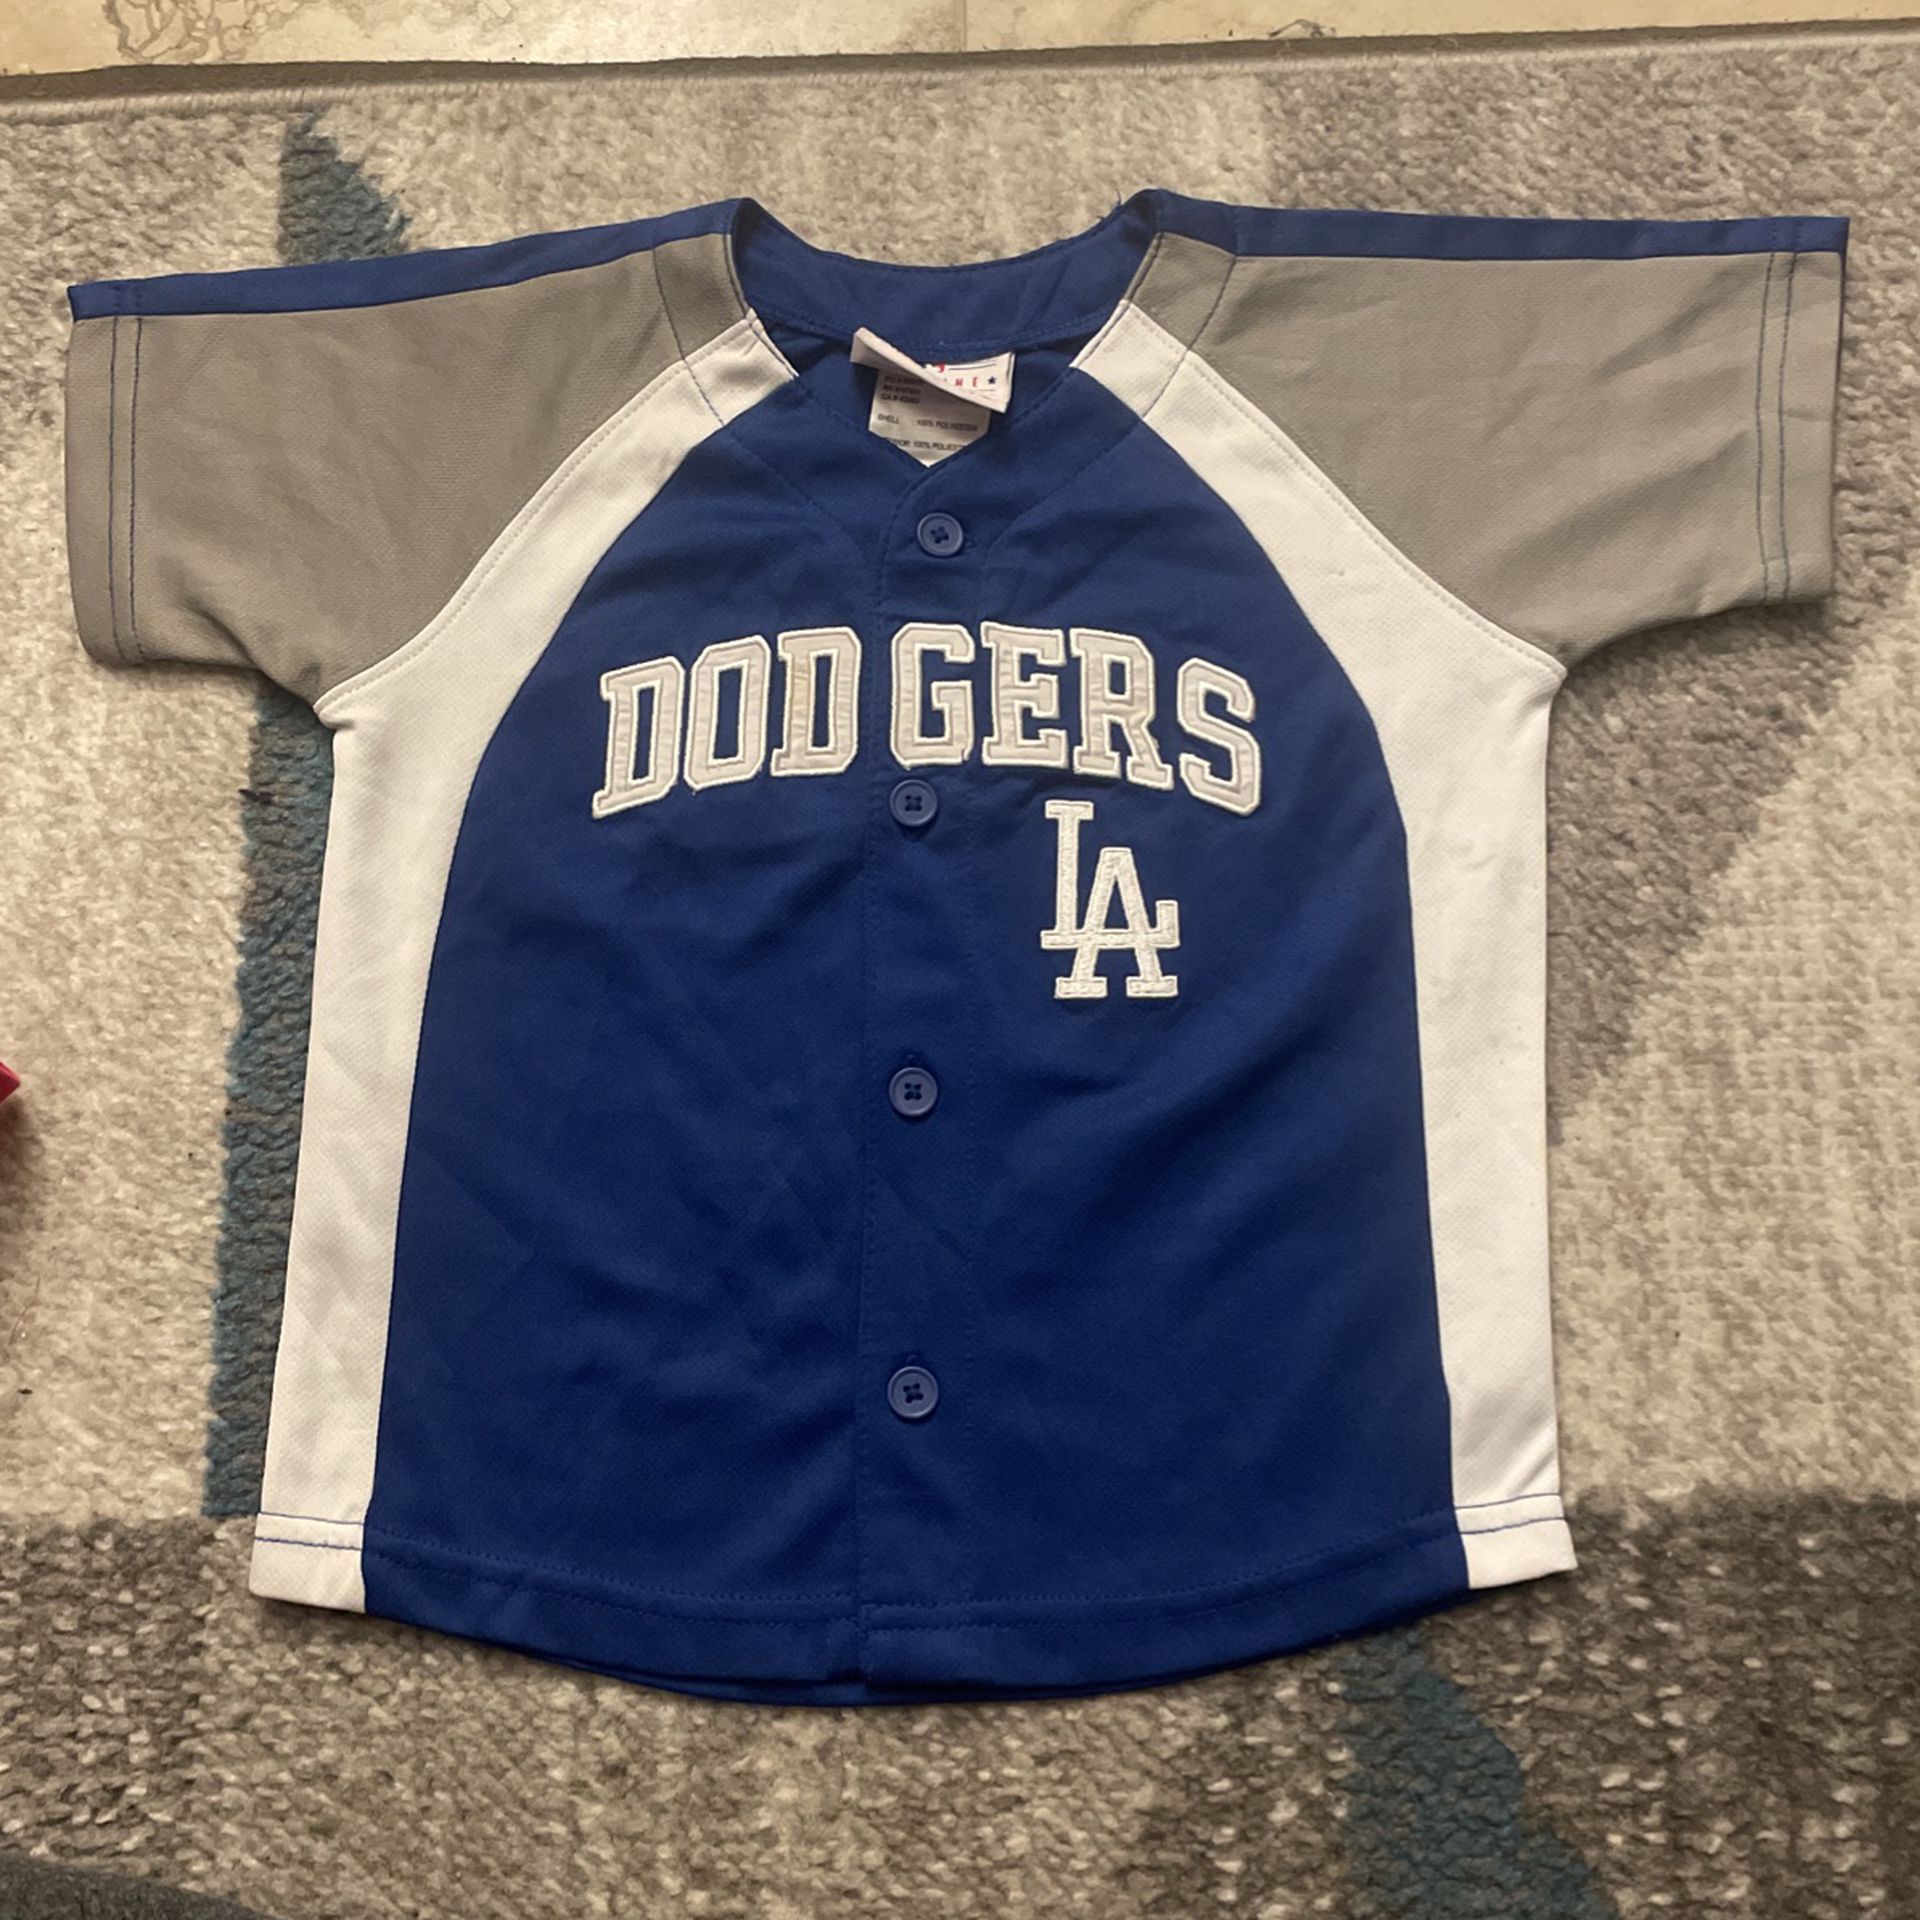 Toddler Dodgers Jersey for Sale in Cypress, CA - OfferUp